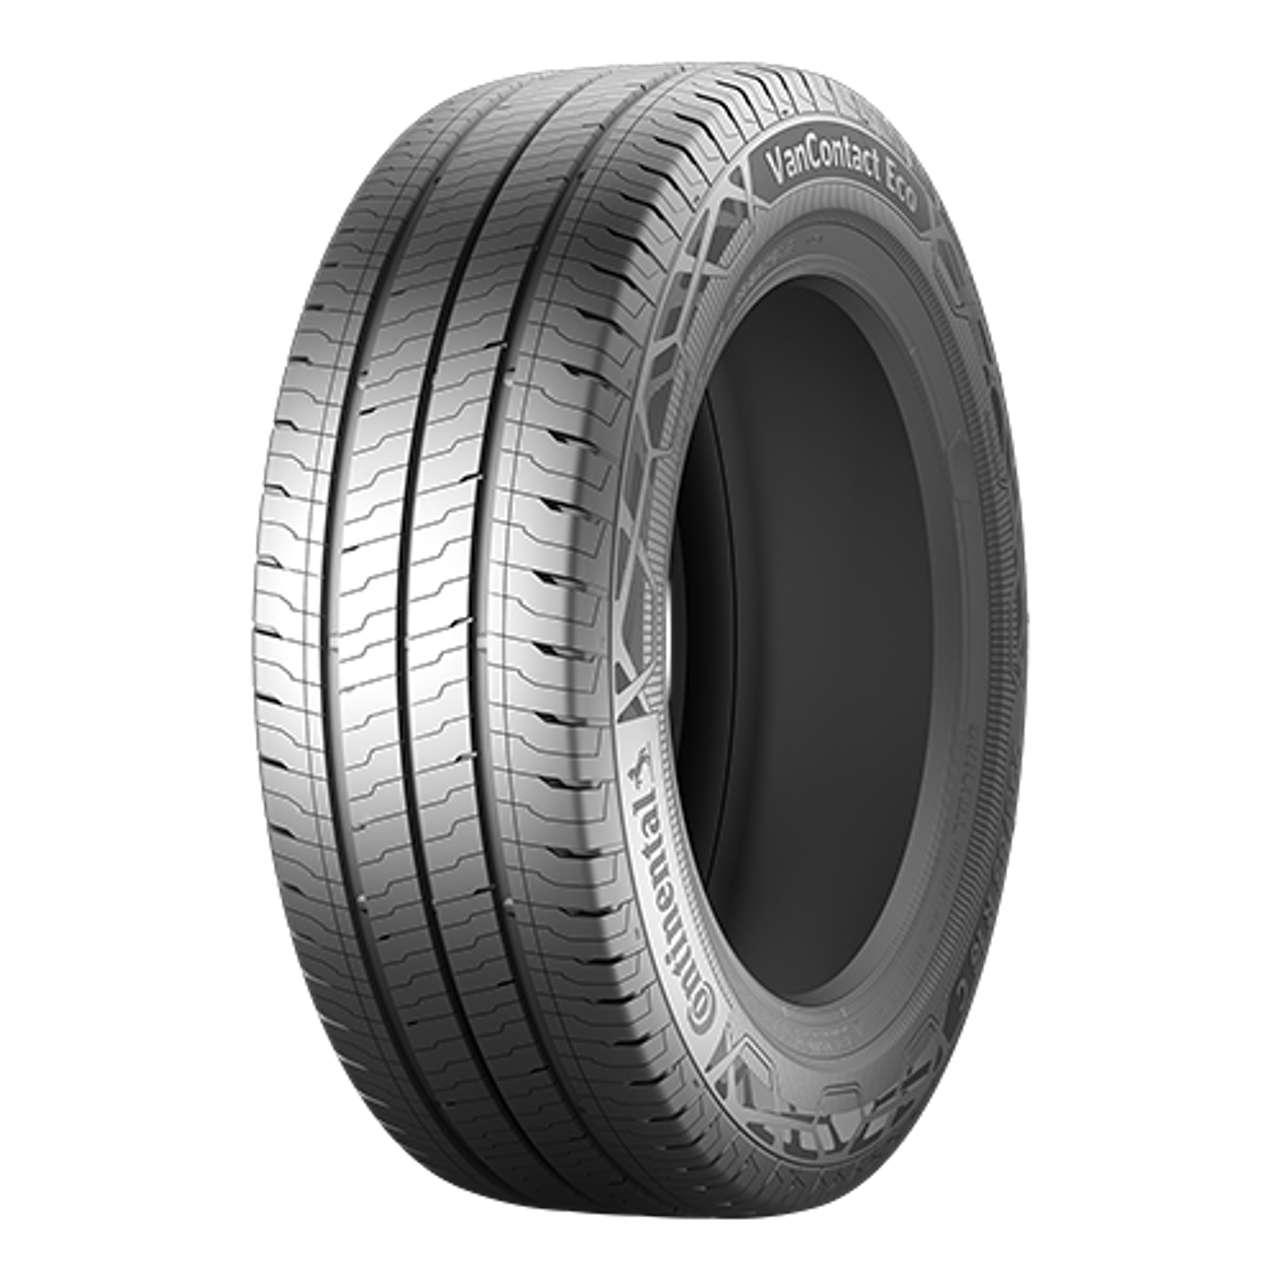 CONTINENTAL VANCONTACT ECO 225/75R16C 121R BSW